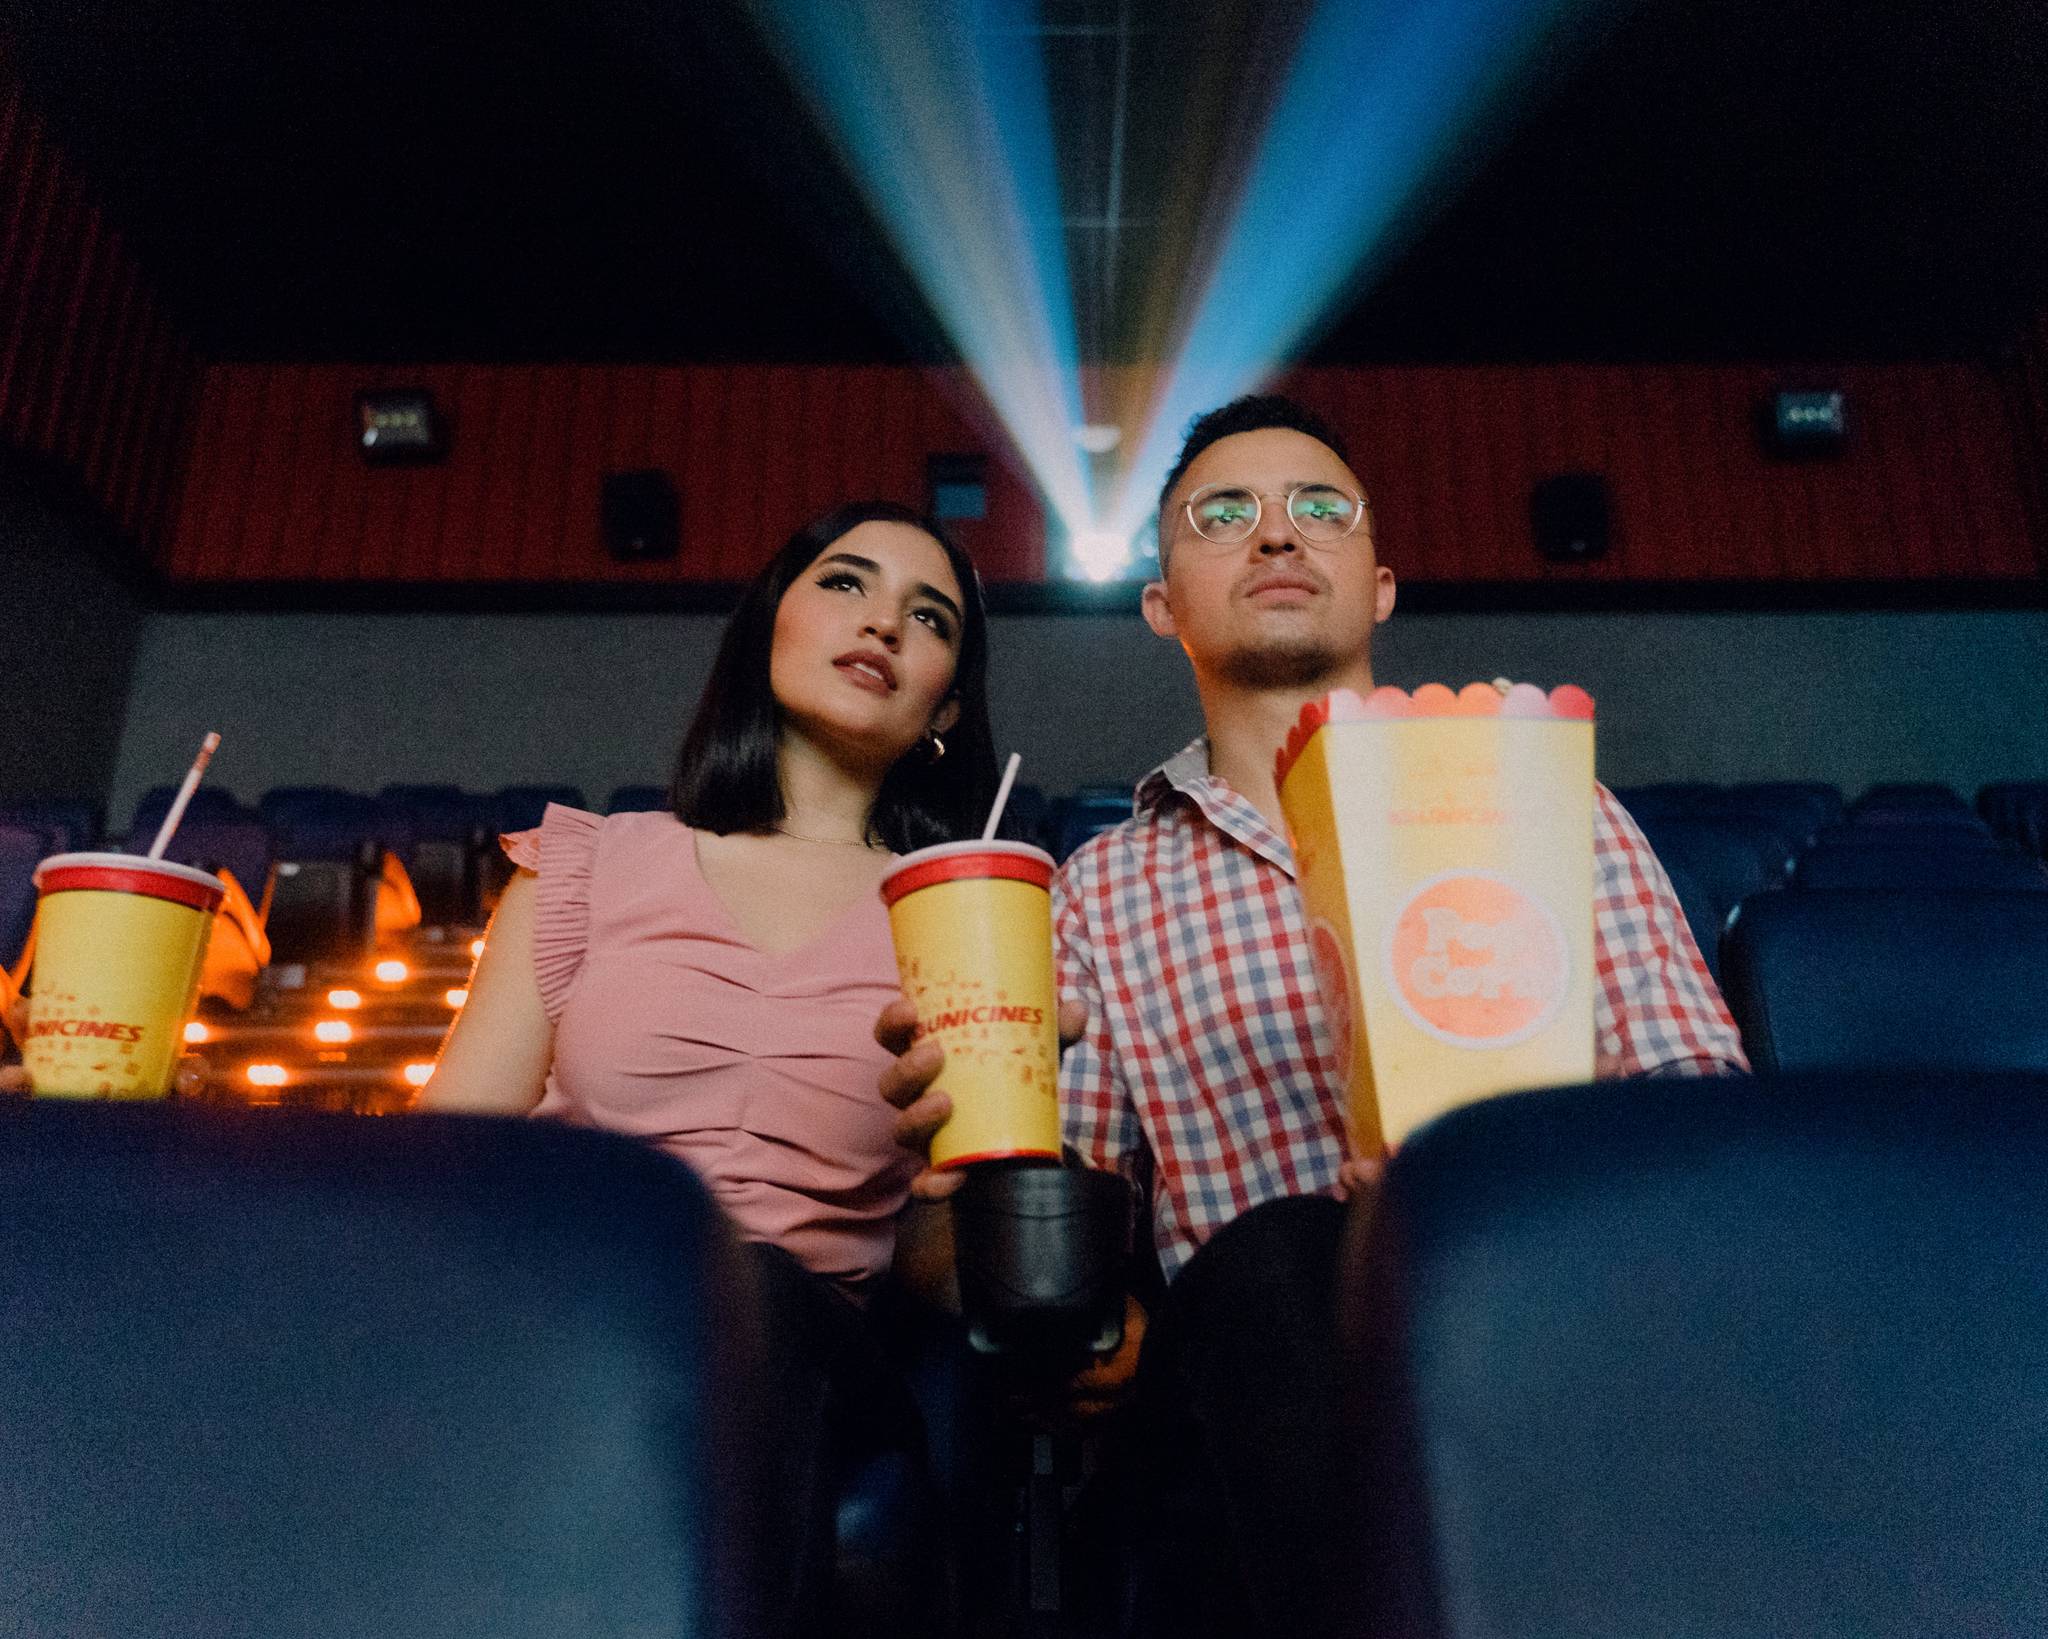 AMC's tiered seating pricing system is met with dismay